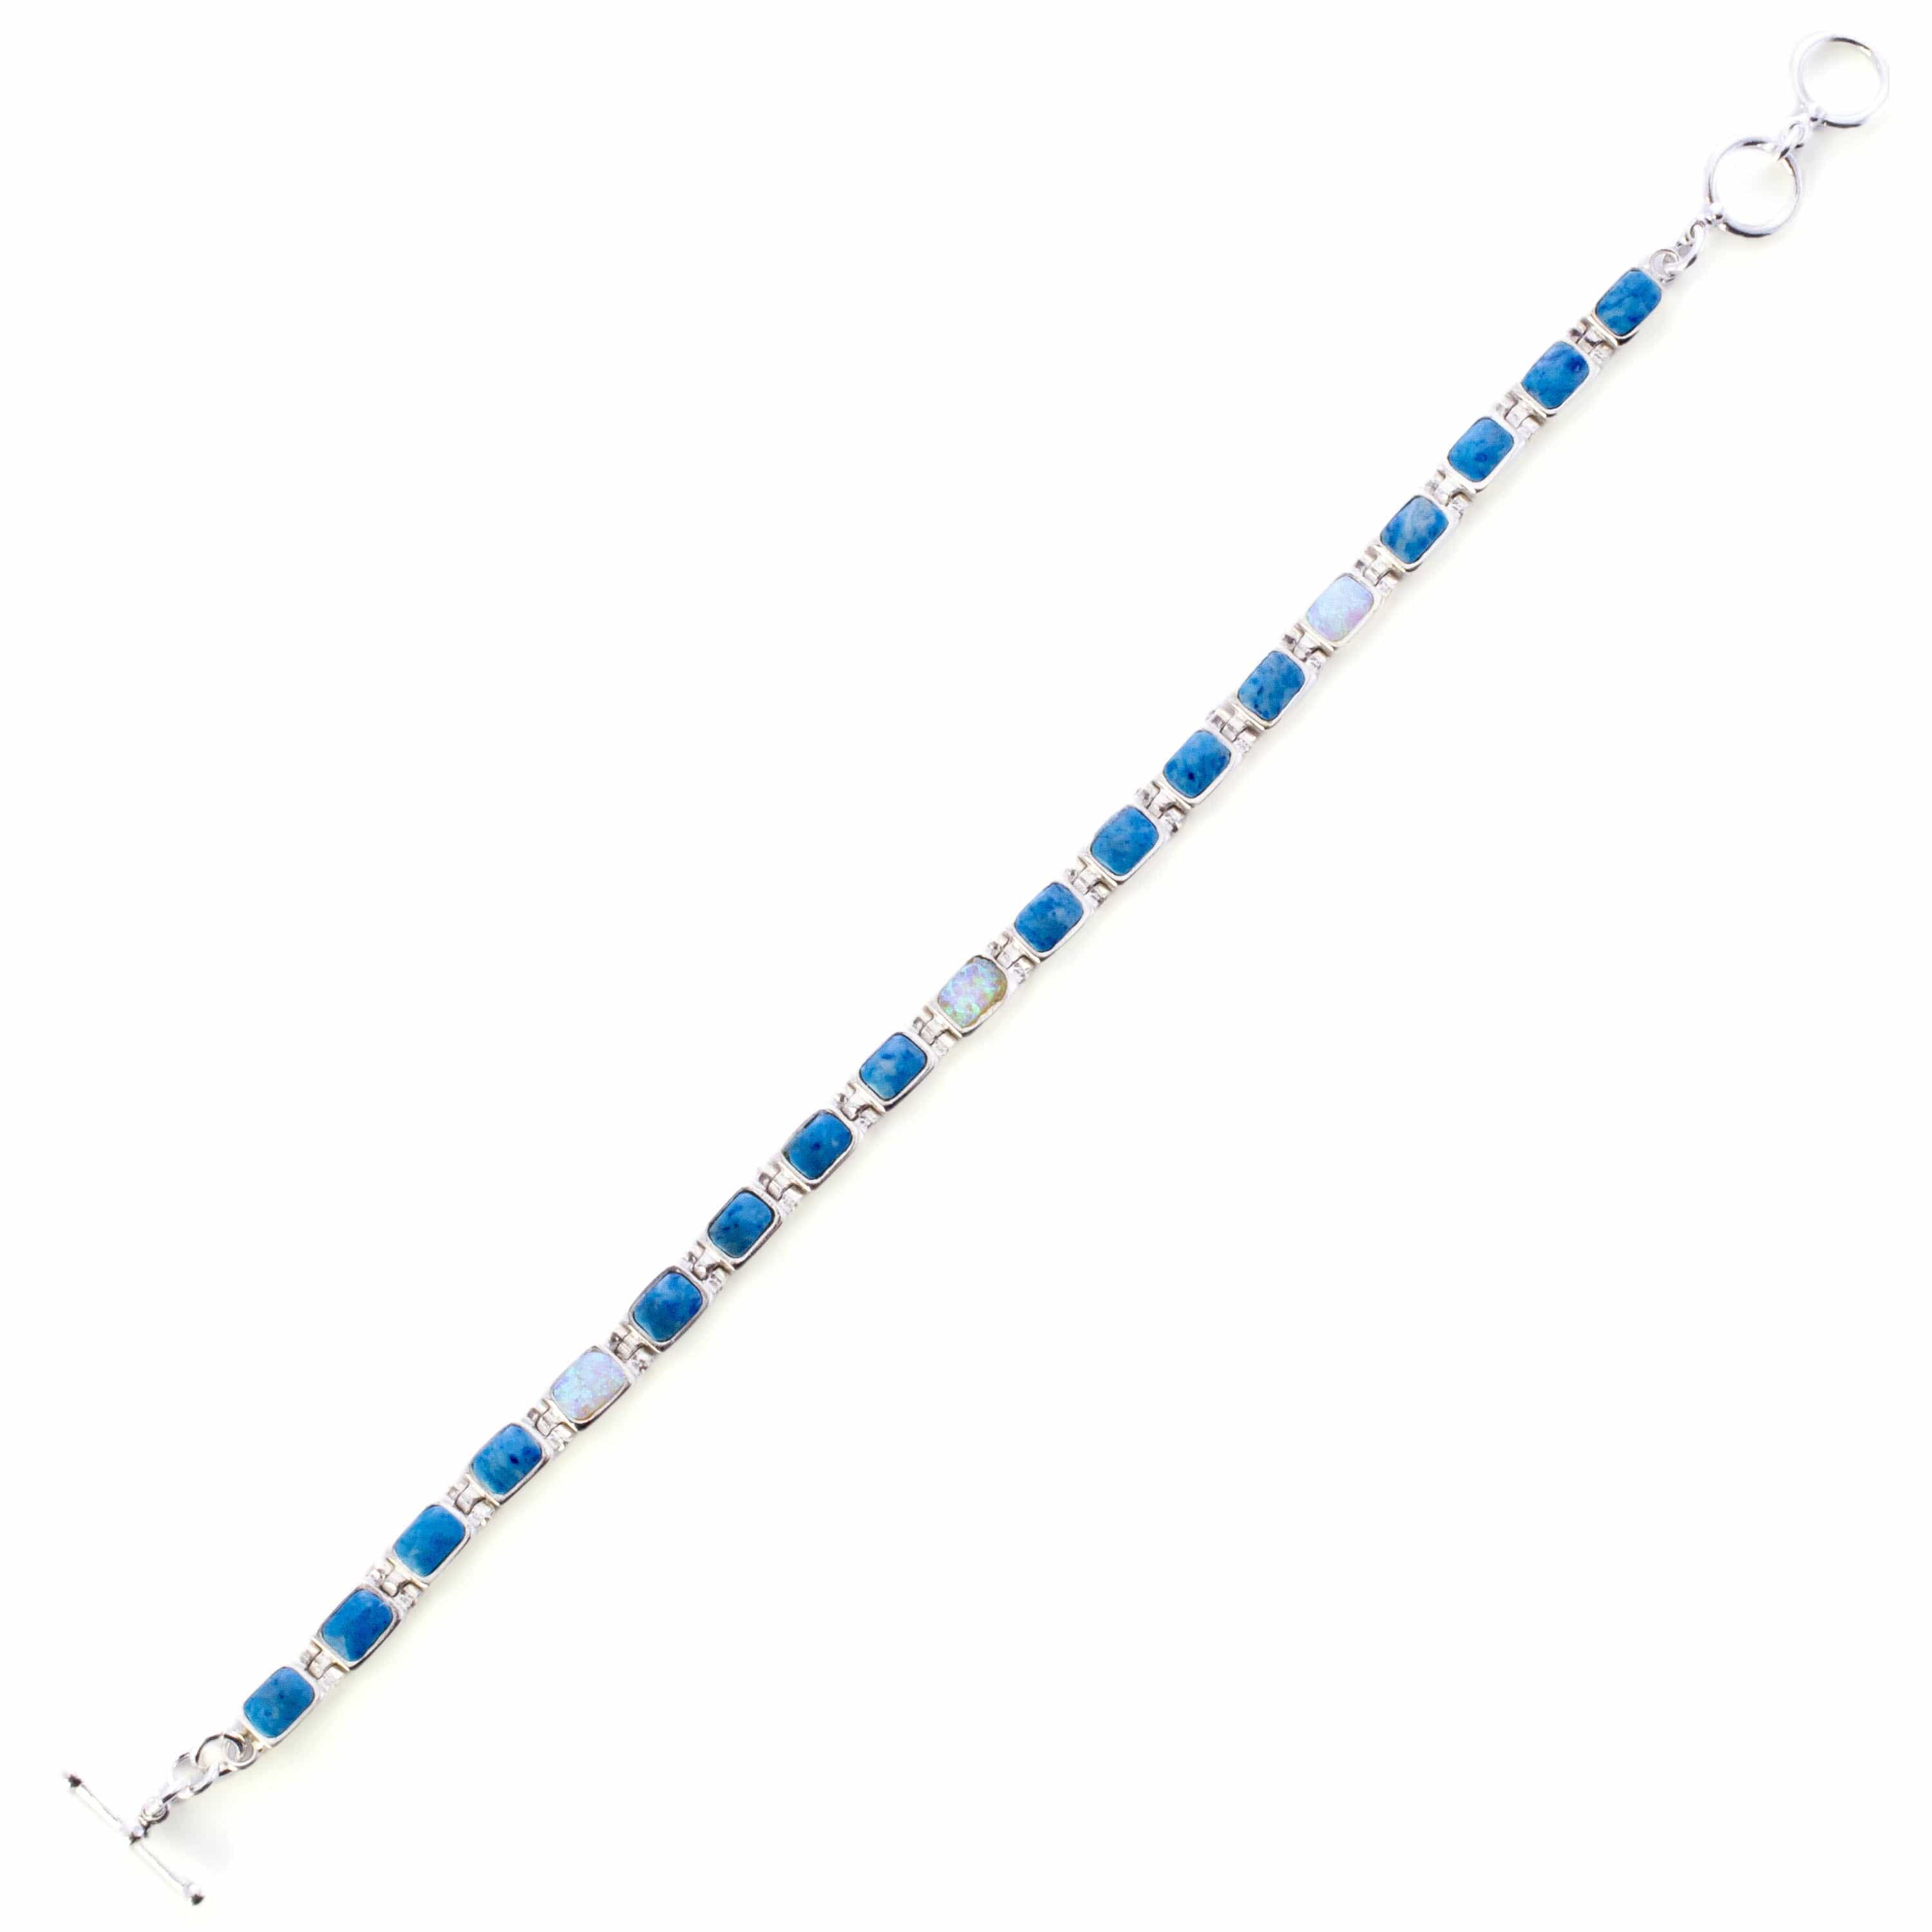 KALIFANO Southwest Silver Jewelry Denim Lapis 925 Sterling Silver Bracelet USA Handmade with Opal Accent NMB.0207.DL